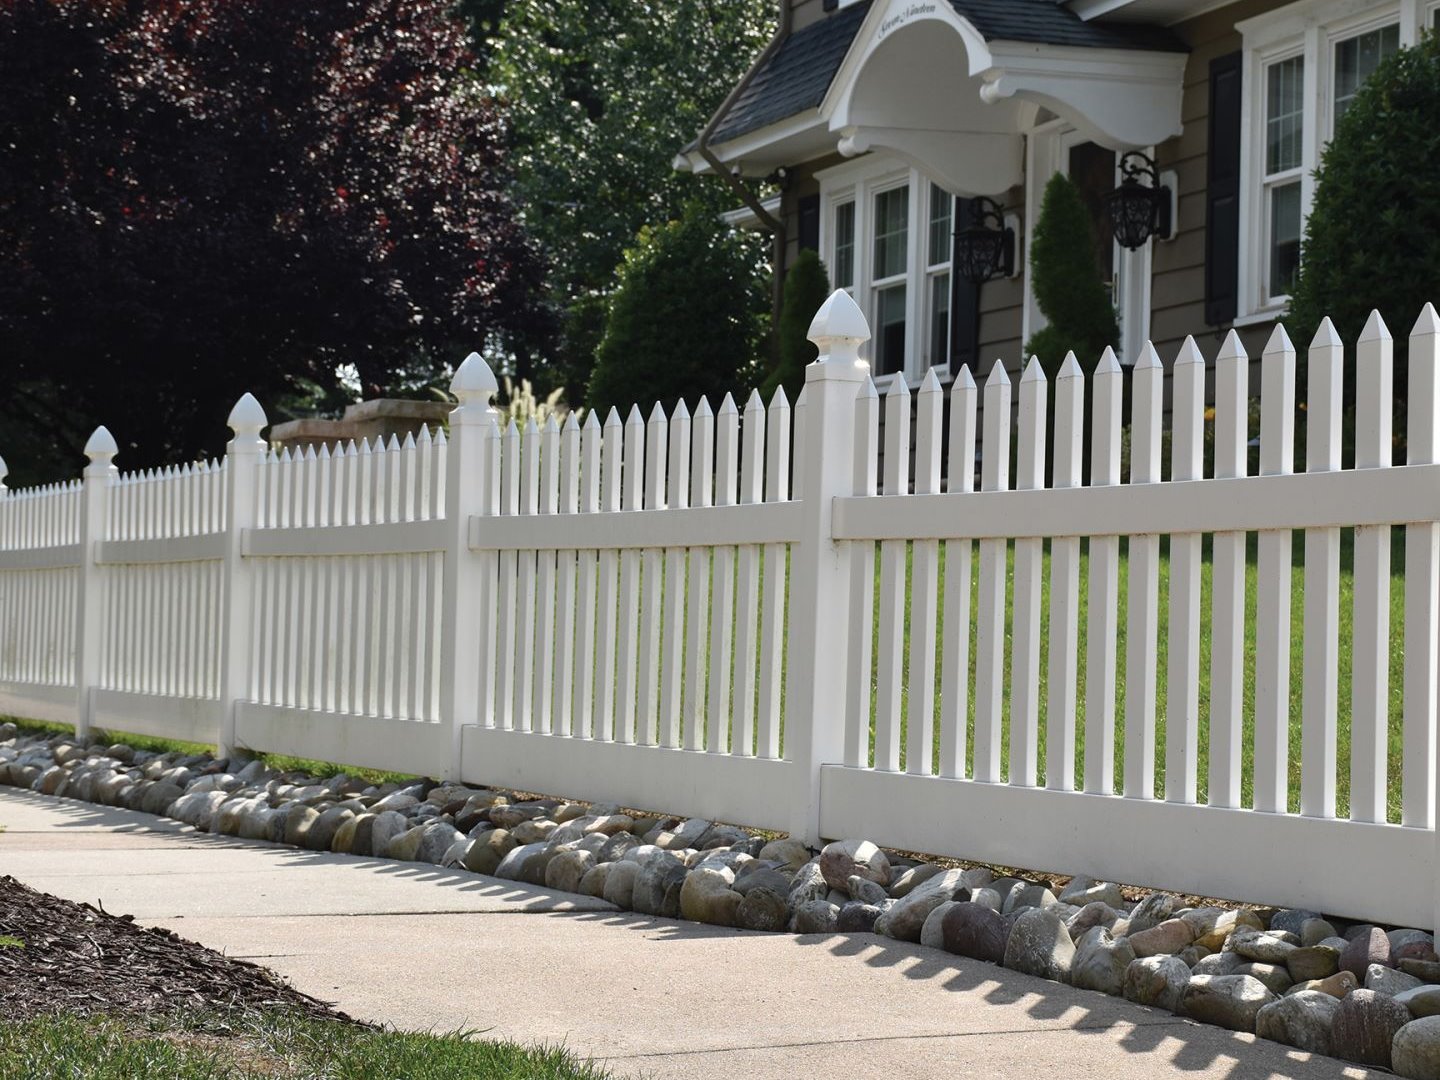 The Lonnie & Co. Fencing Difference in Fort Worth Texas Fence Installations